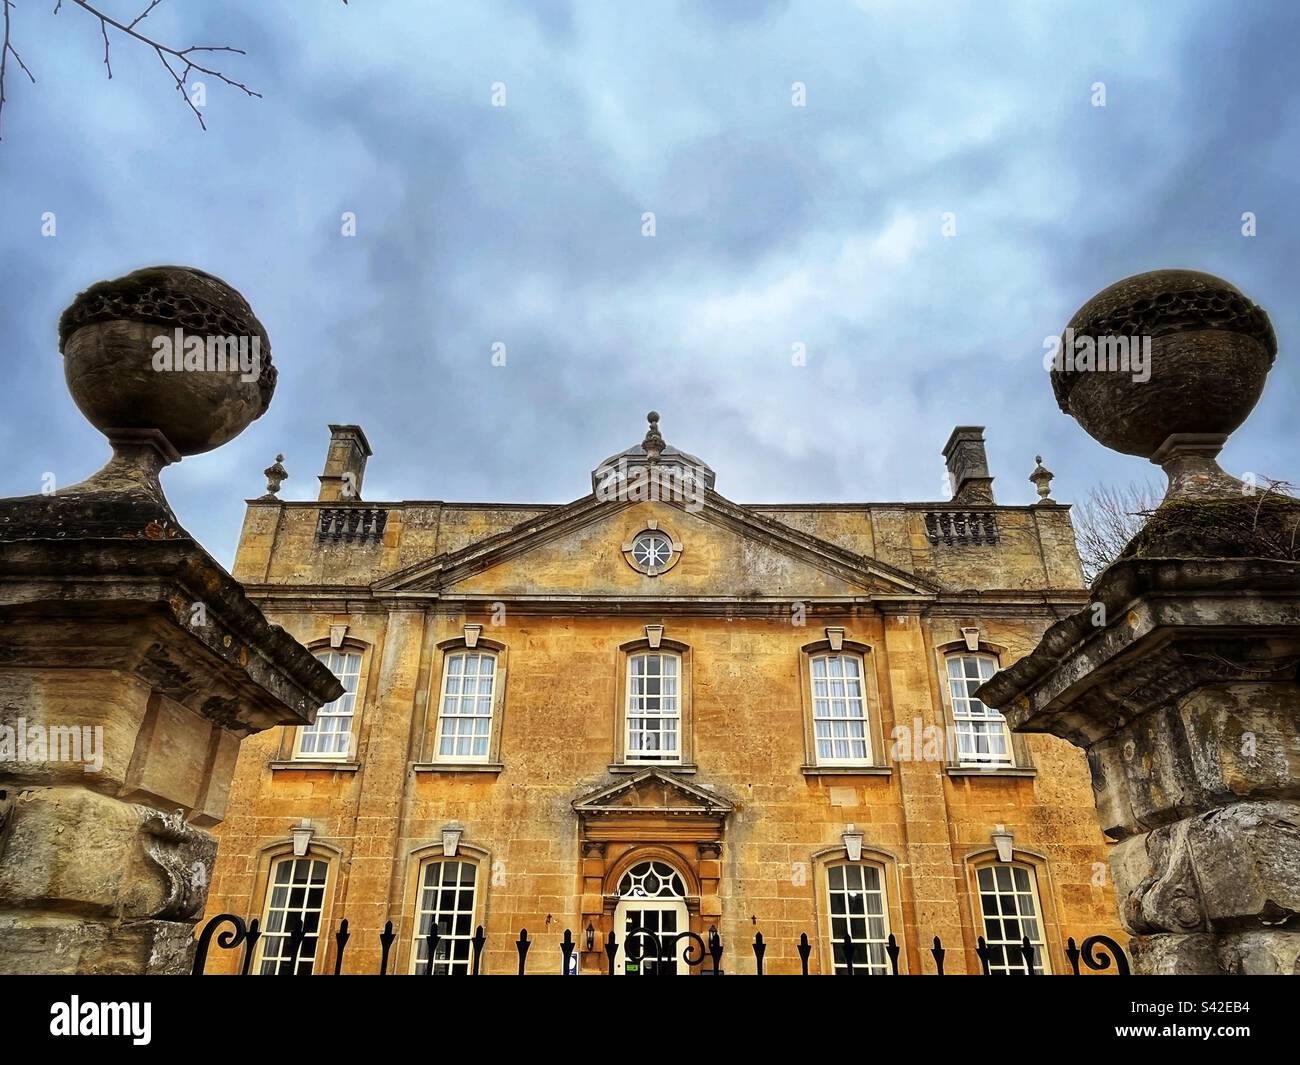 The facade of a former grandiose home made from Cotswold stone in Bourton-on-the-Water, a village and civil parish in Gloucestershire, England. Stock Photo